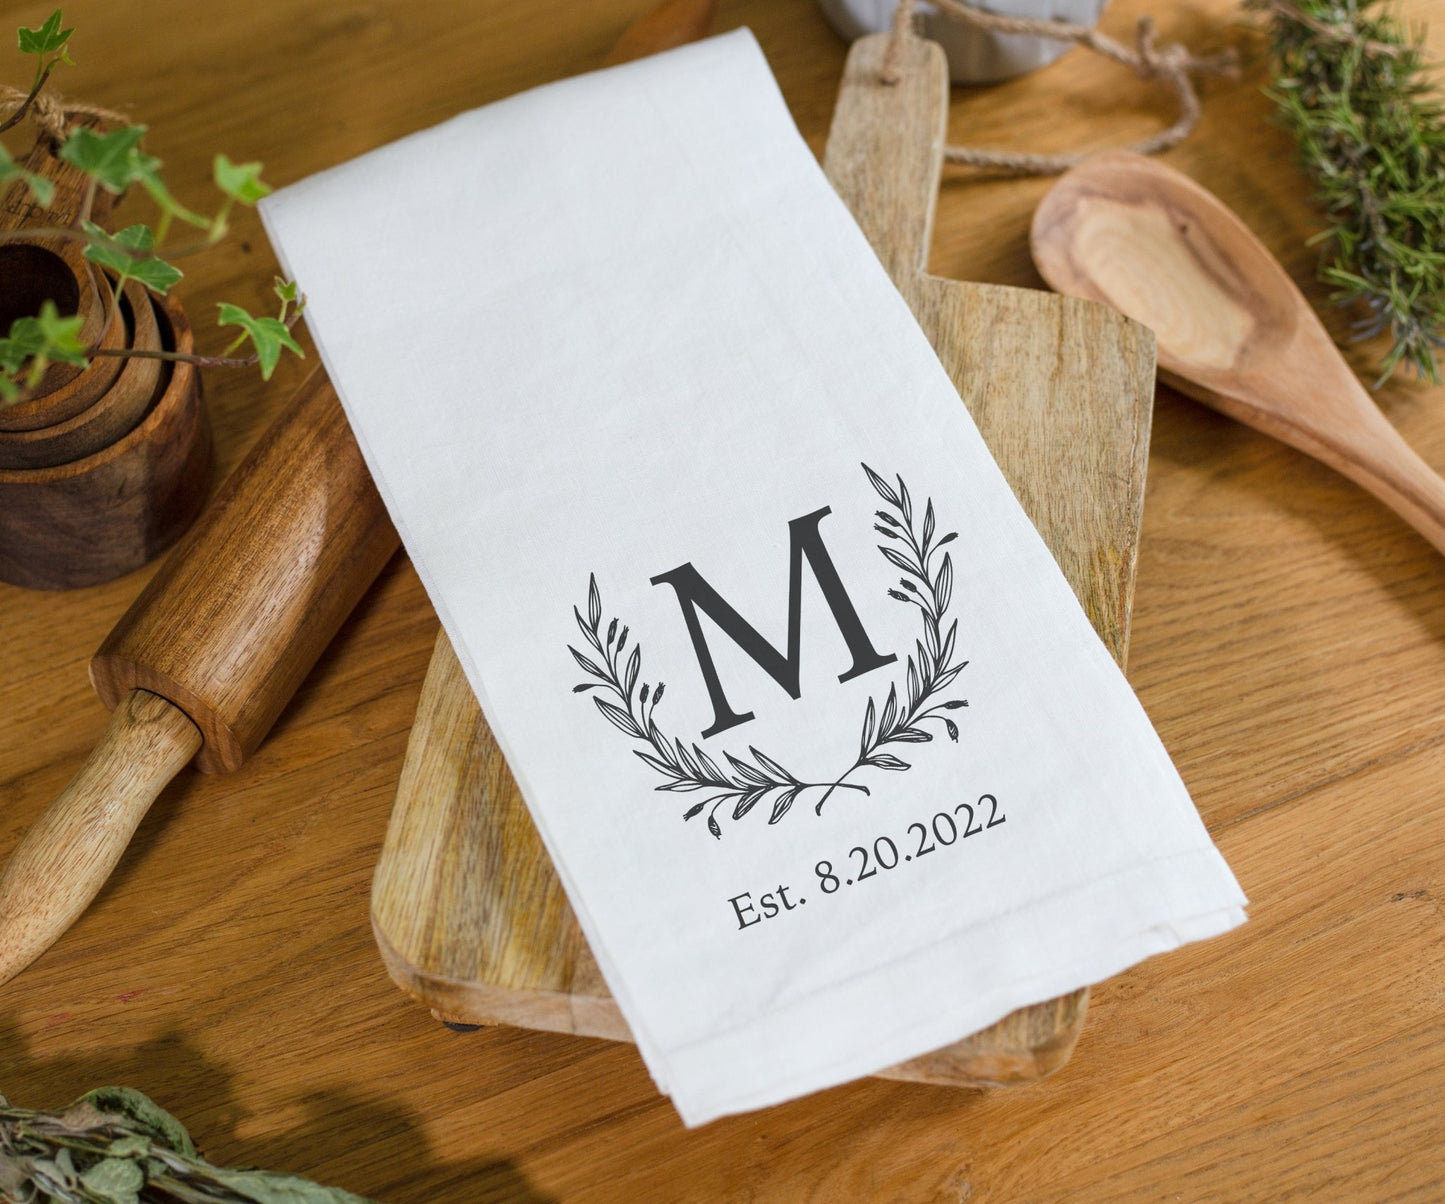 Load image into Gallery viewer, Family Initial Monogrammed Kitchen Tea Towel With Date | Bridal Shower Gift | Housewarming Gift Tea Towel | Personalized Kitchen Tea Towel
